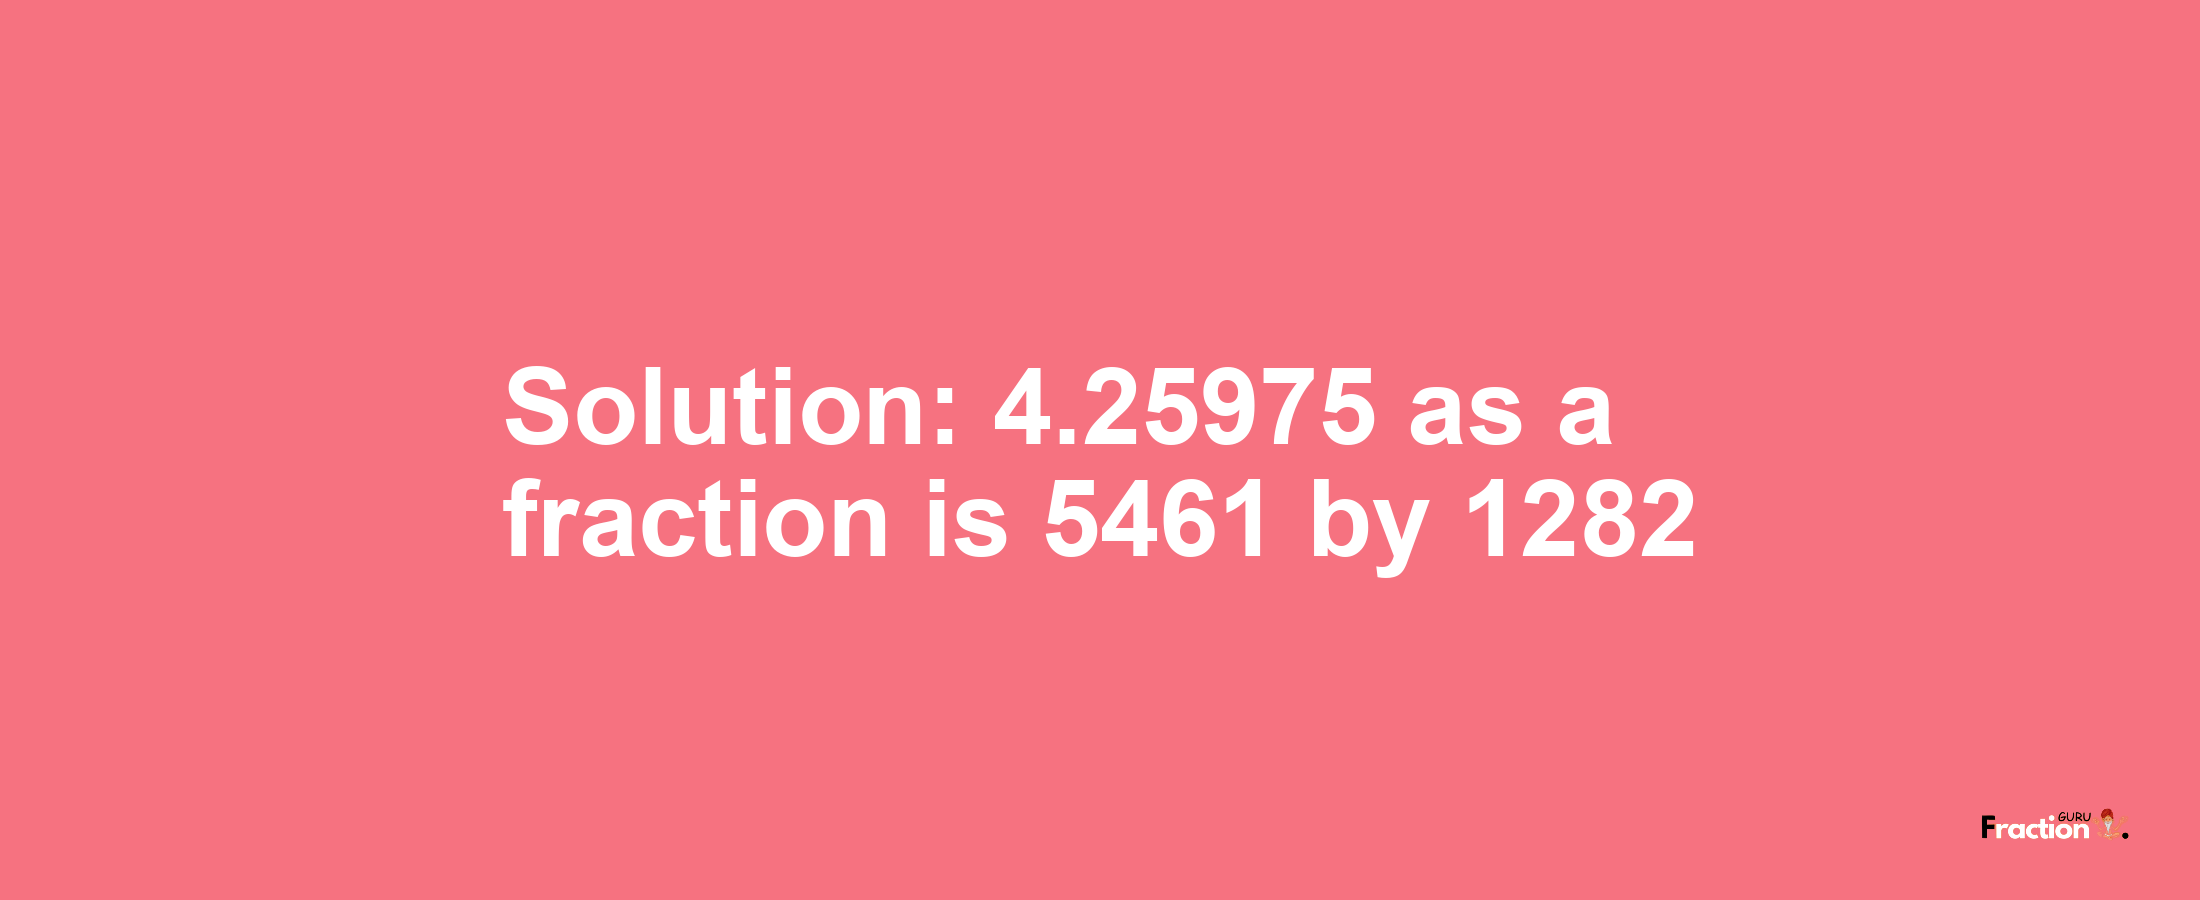 Solution:4.25975 as a fraction is 5461/1282